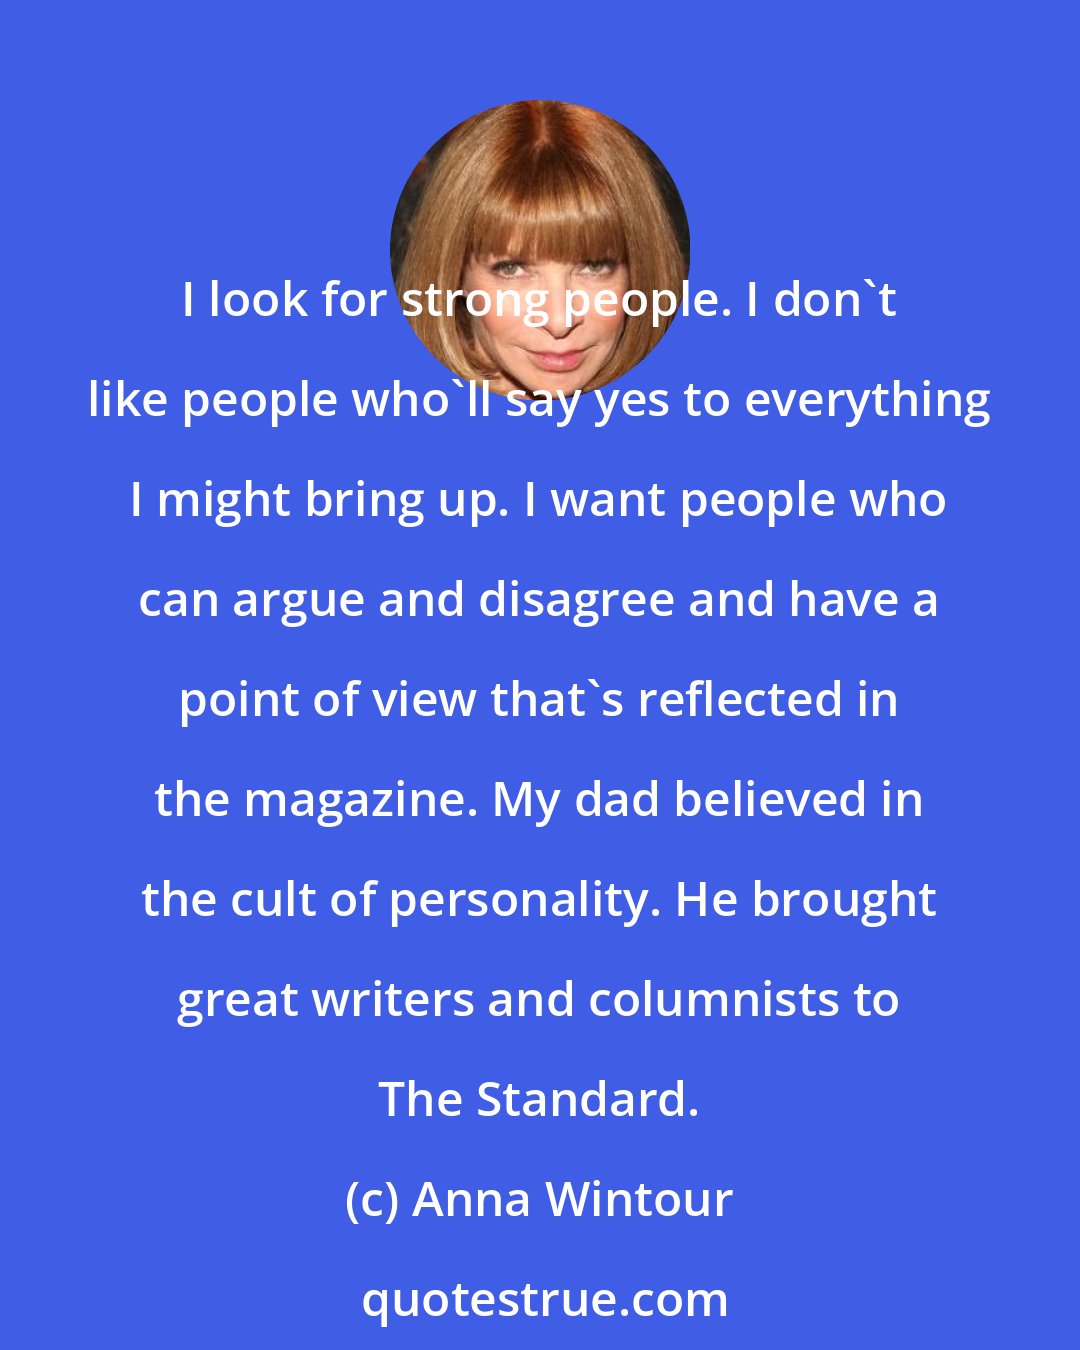 Anna Wintour: I look for strong people. I don't like people who'll say yes to everything I might bring up. I want people who can argue and disagree and have a point of view that's reflected in the magazine. My dad believed in the cult of personality. He brought great writers and columnists to The Standard.